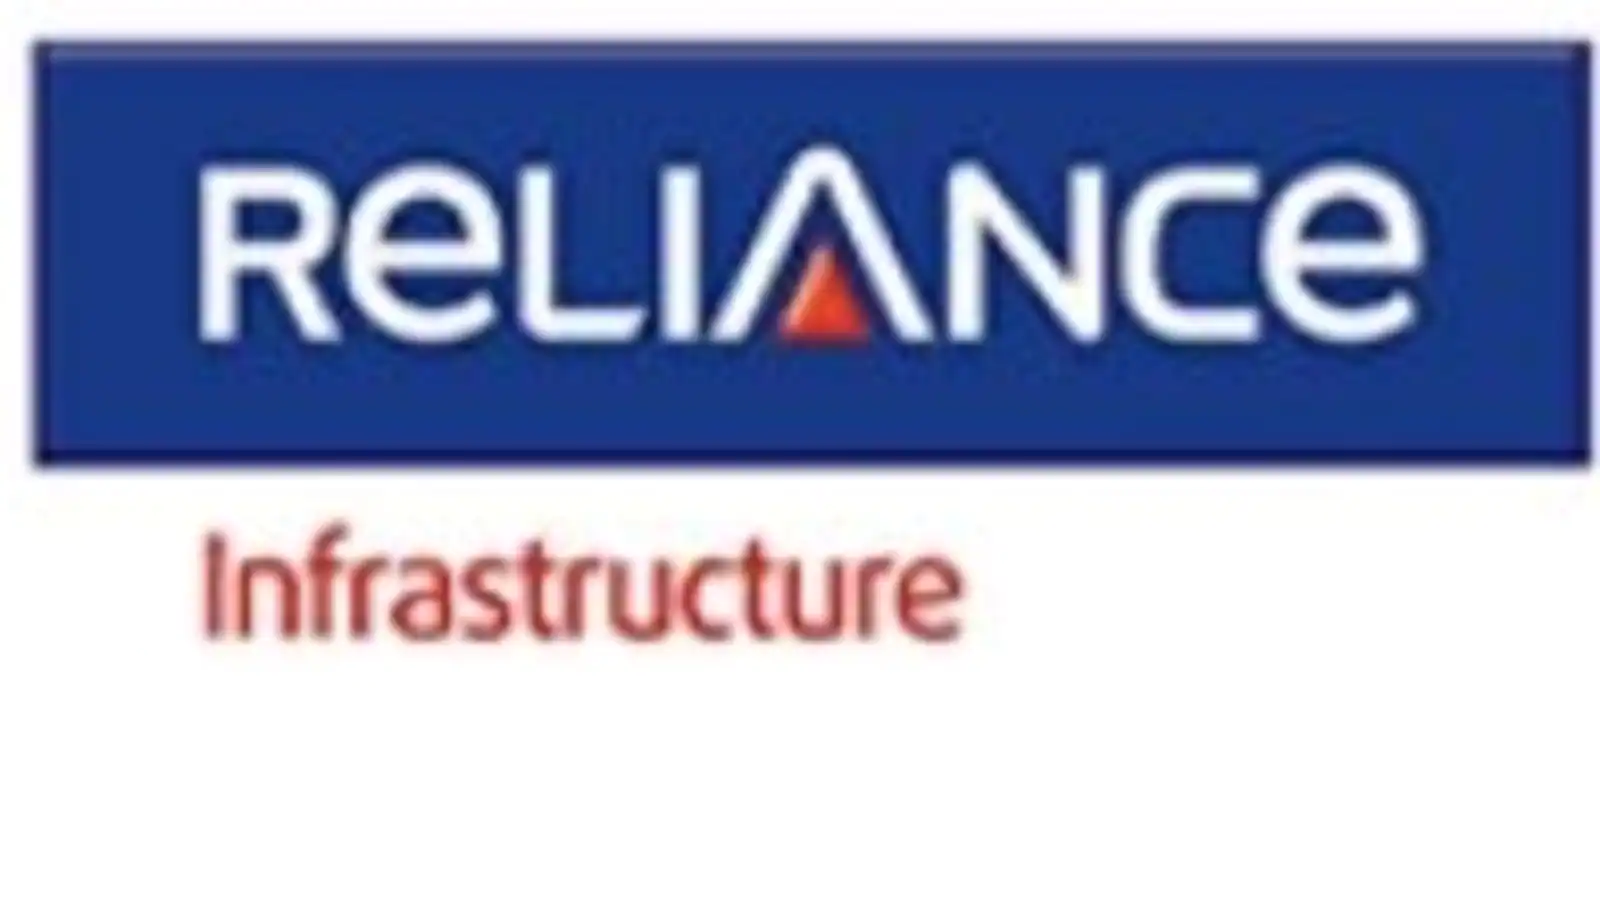 Reliance Infrastructure net loss narrows to ₹66.11 crore in June quarter